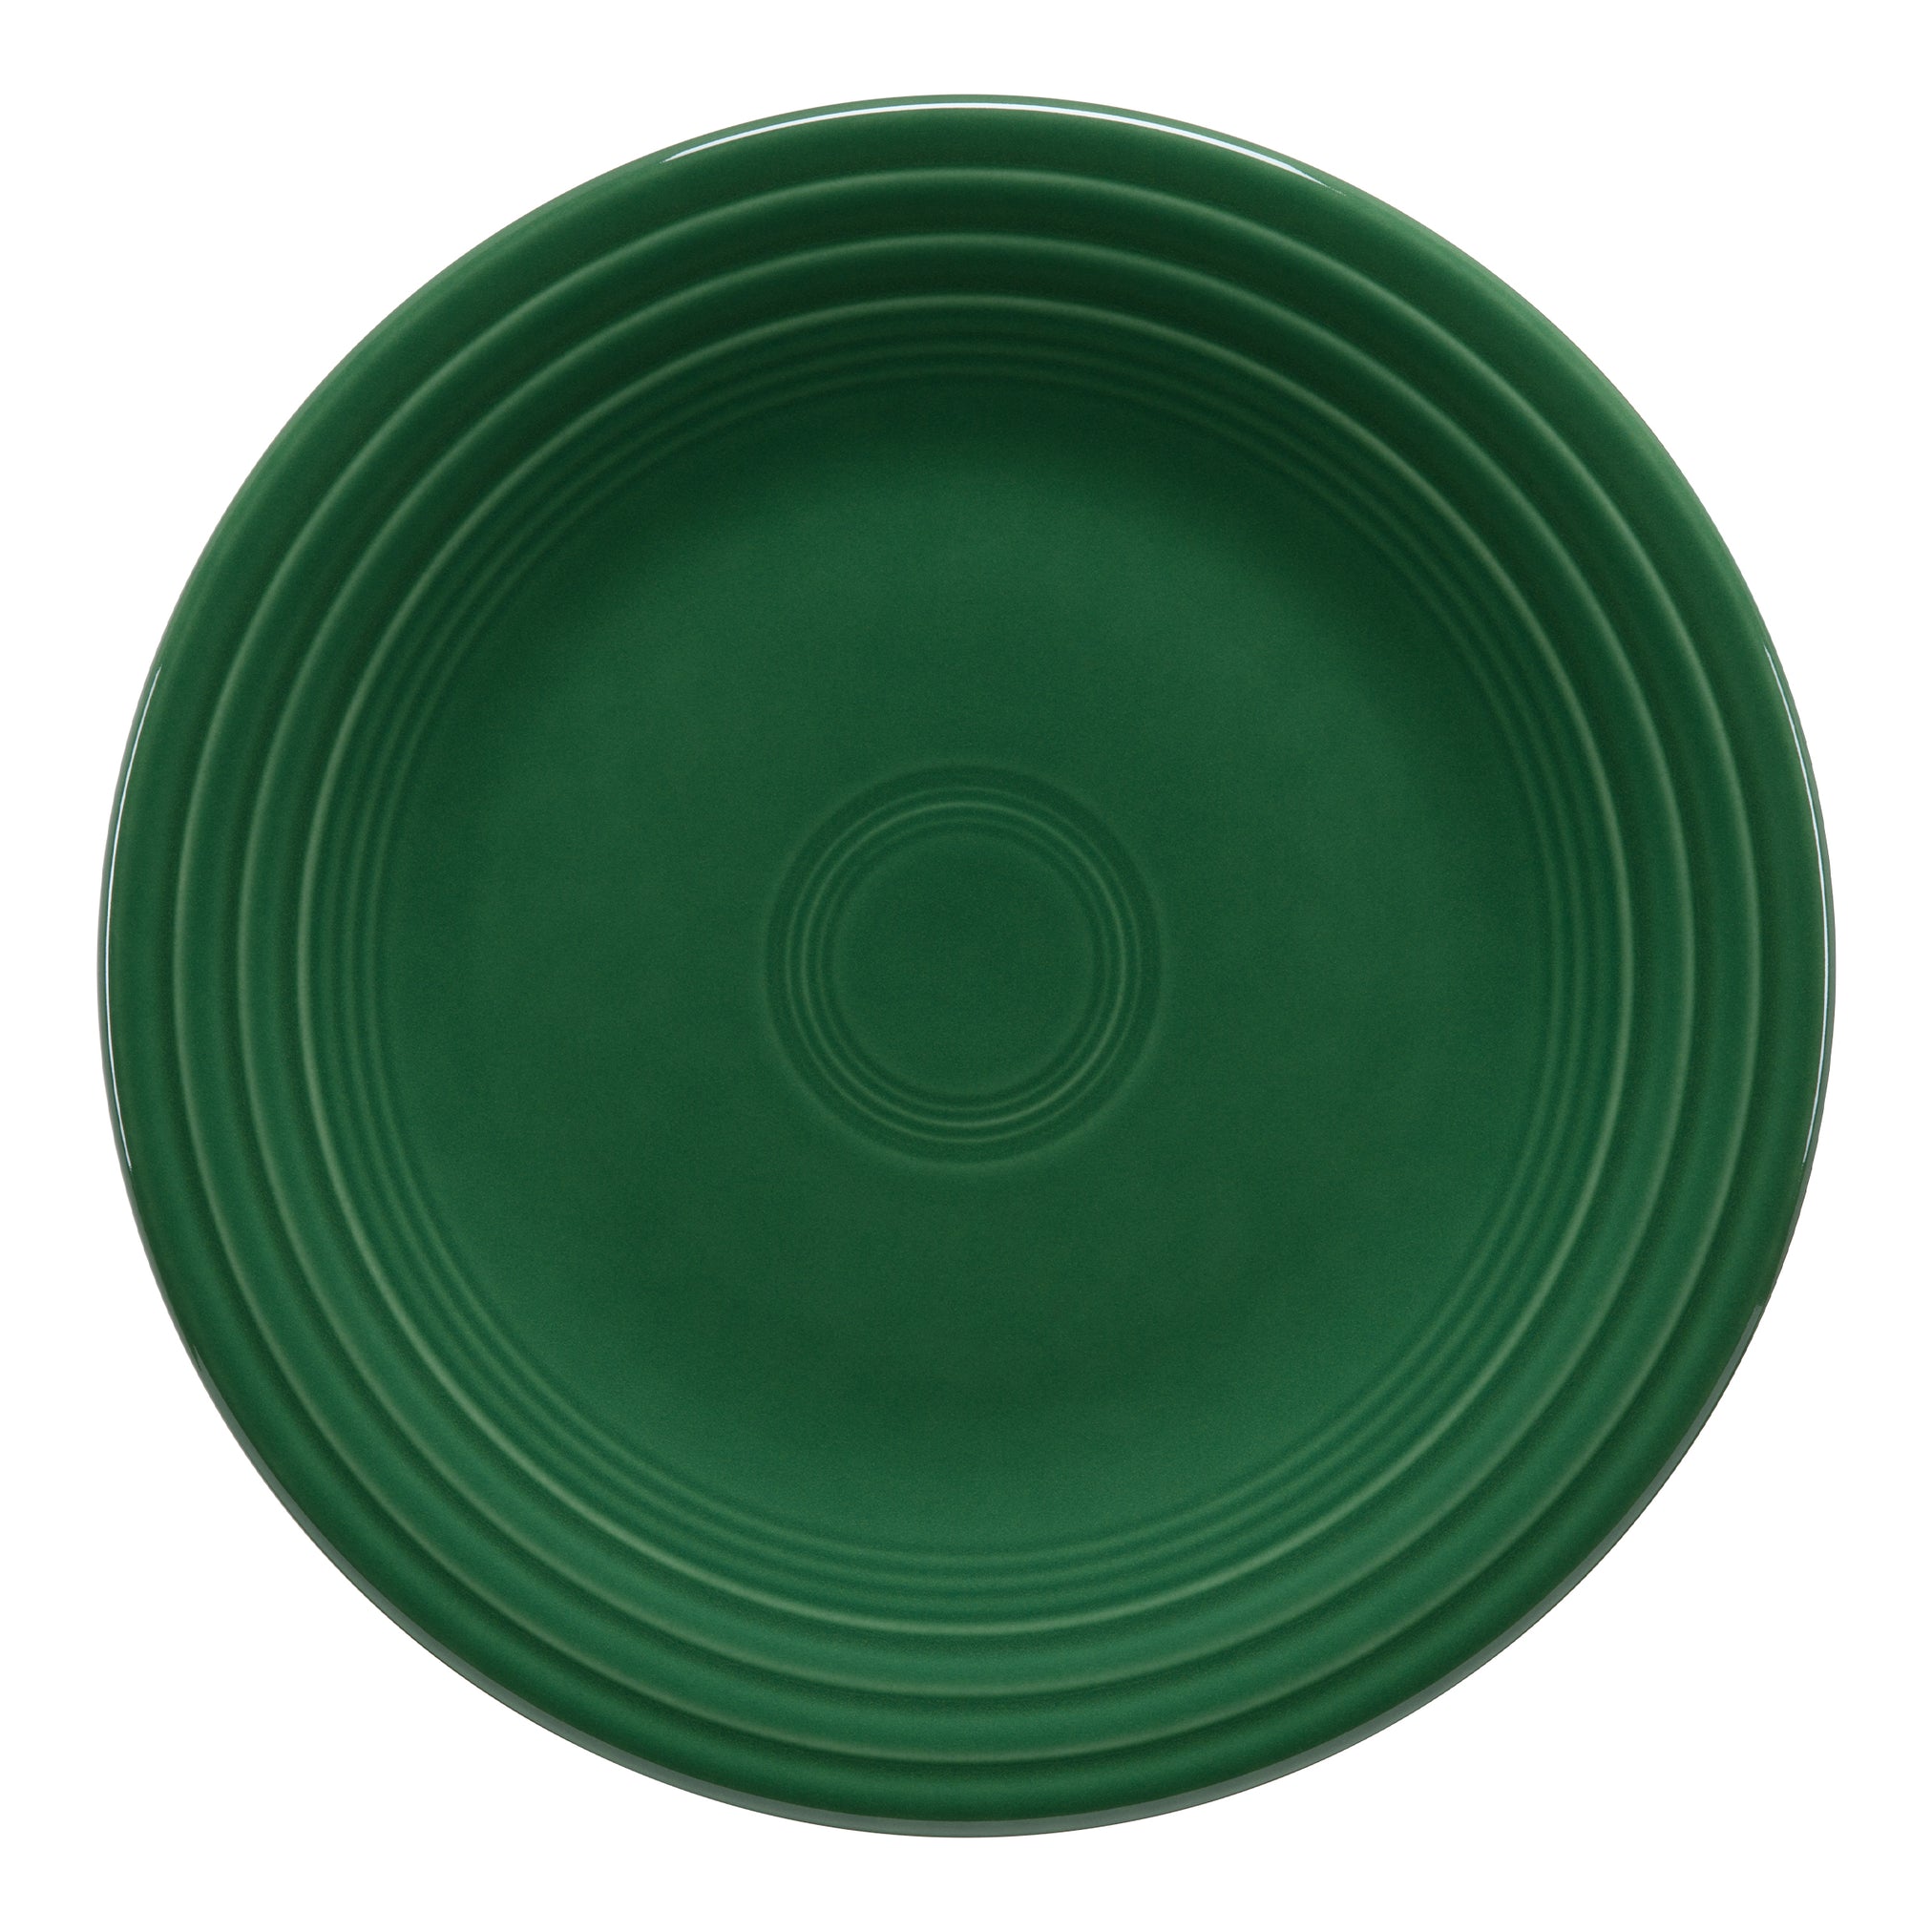 Luncheon Plate Turquoise 9